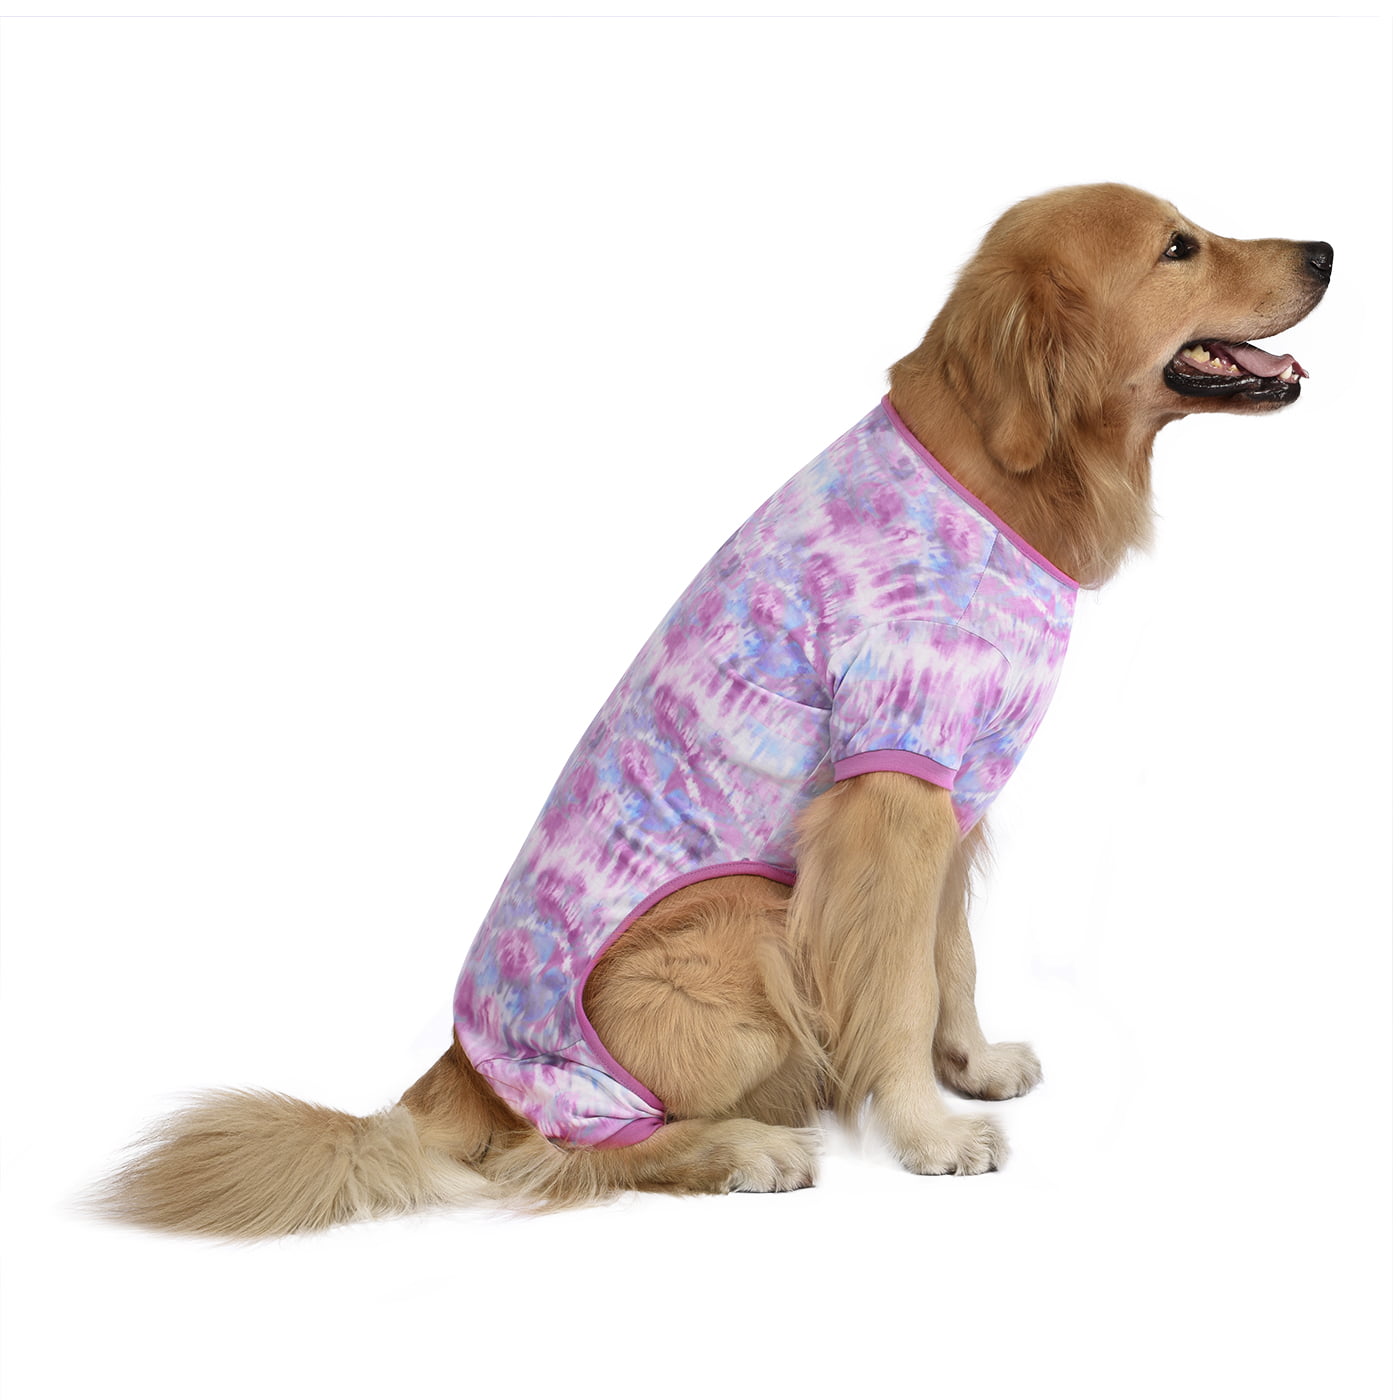 Full Belly 26 Chest 23.62,Back Length 13.96 , Pink Rainbow Dog Pajamas Jumpsuit for Medium Large Dogs,Lightweight Dog Pjs Clothes Apparel Onesies,Shirt for Large Size Dogs After Surgery